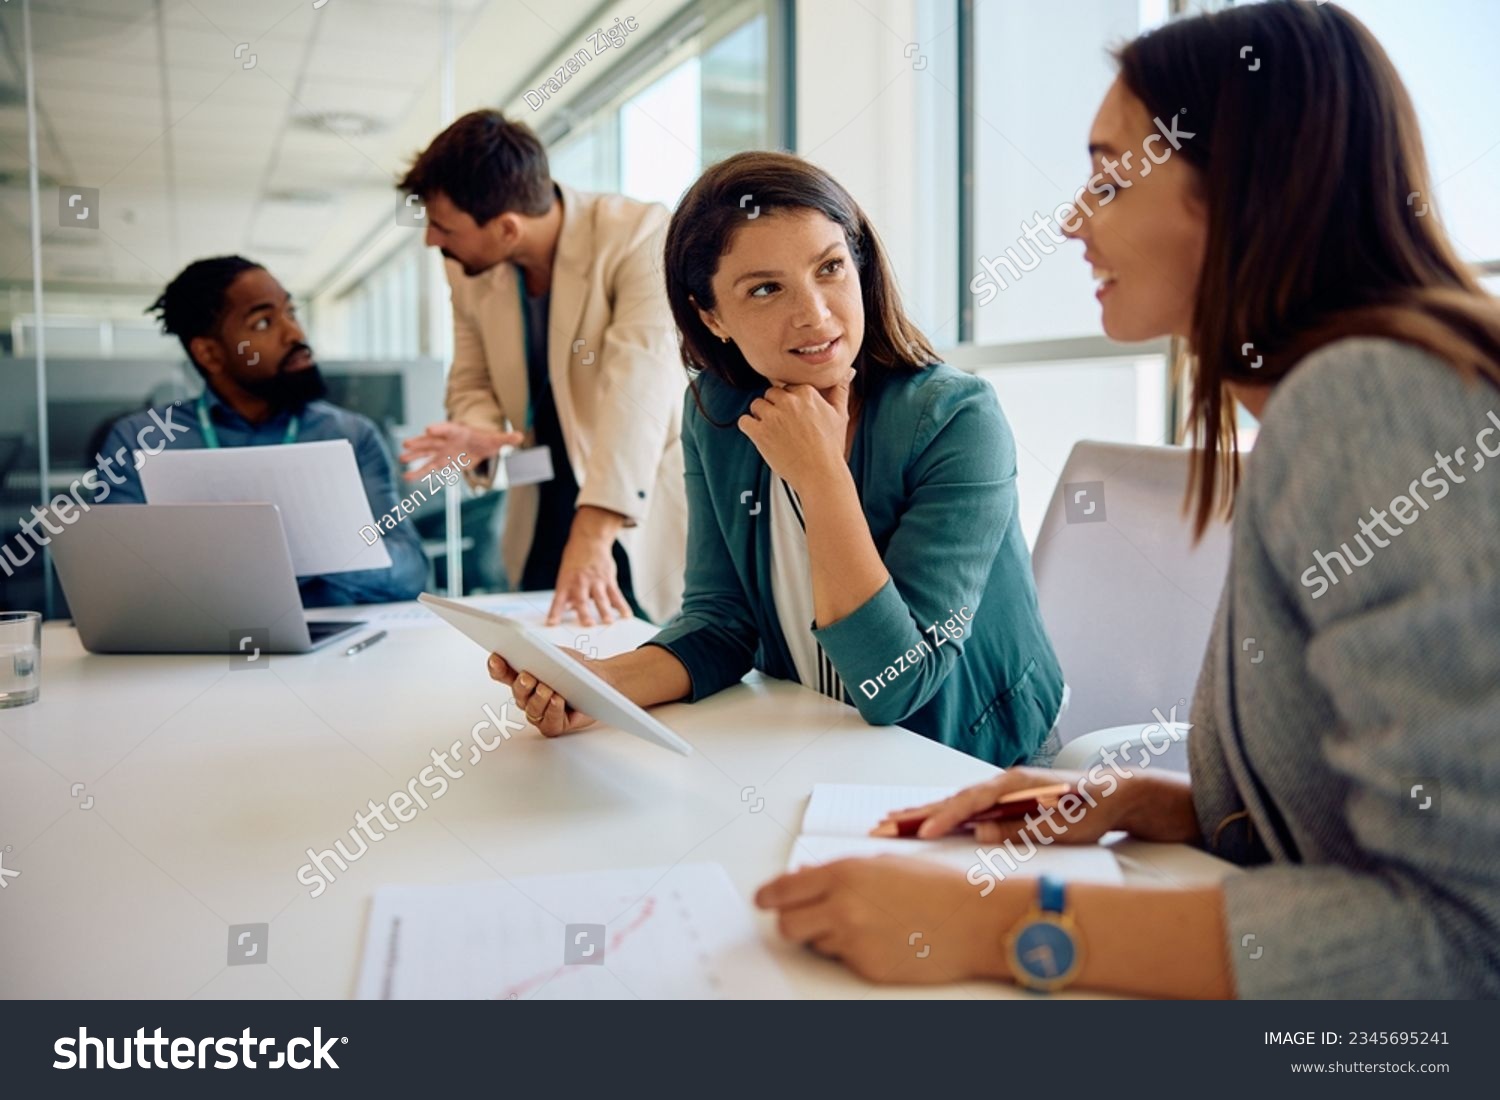 Mid adult businesswoman using digital tablet while talking to female coworker on a meeting in the office.  #2345695241